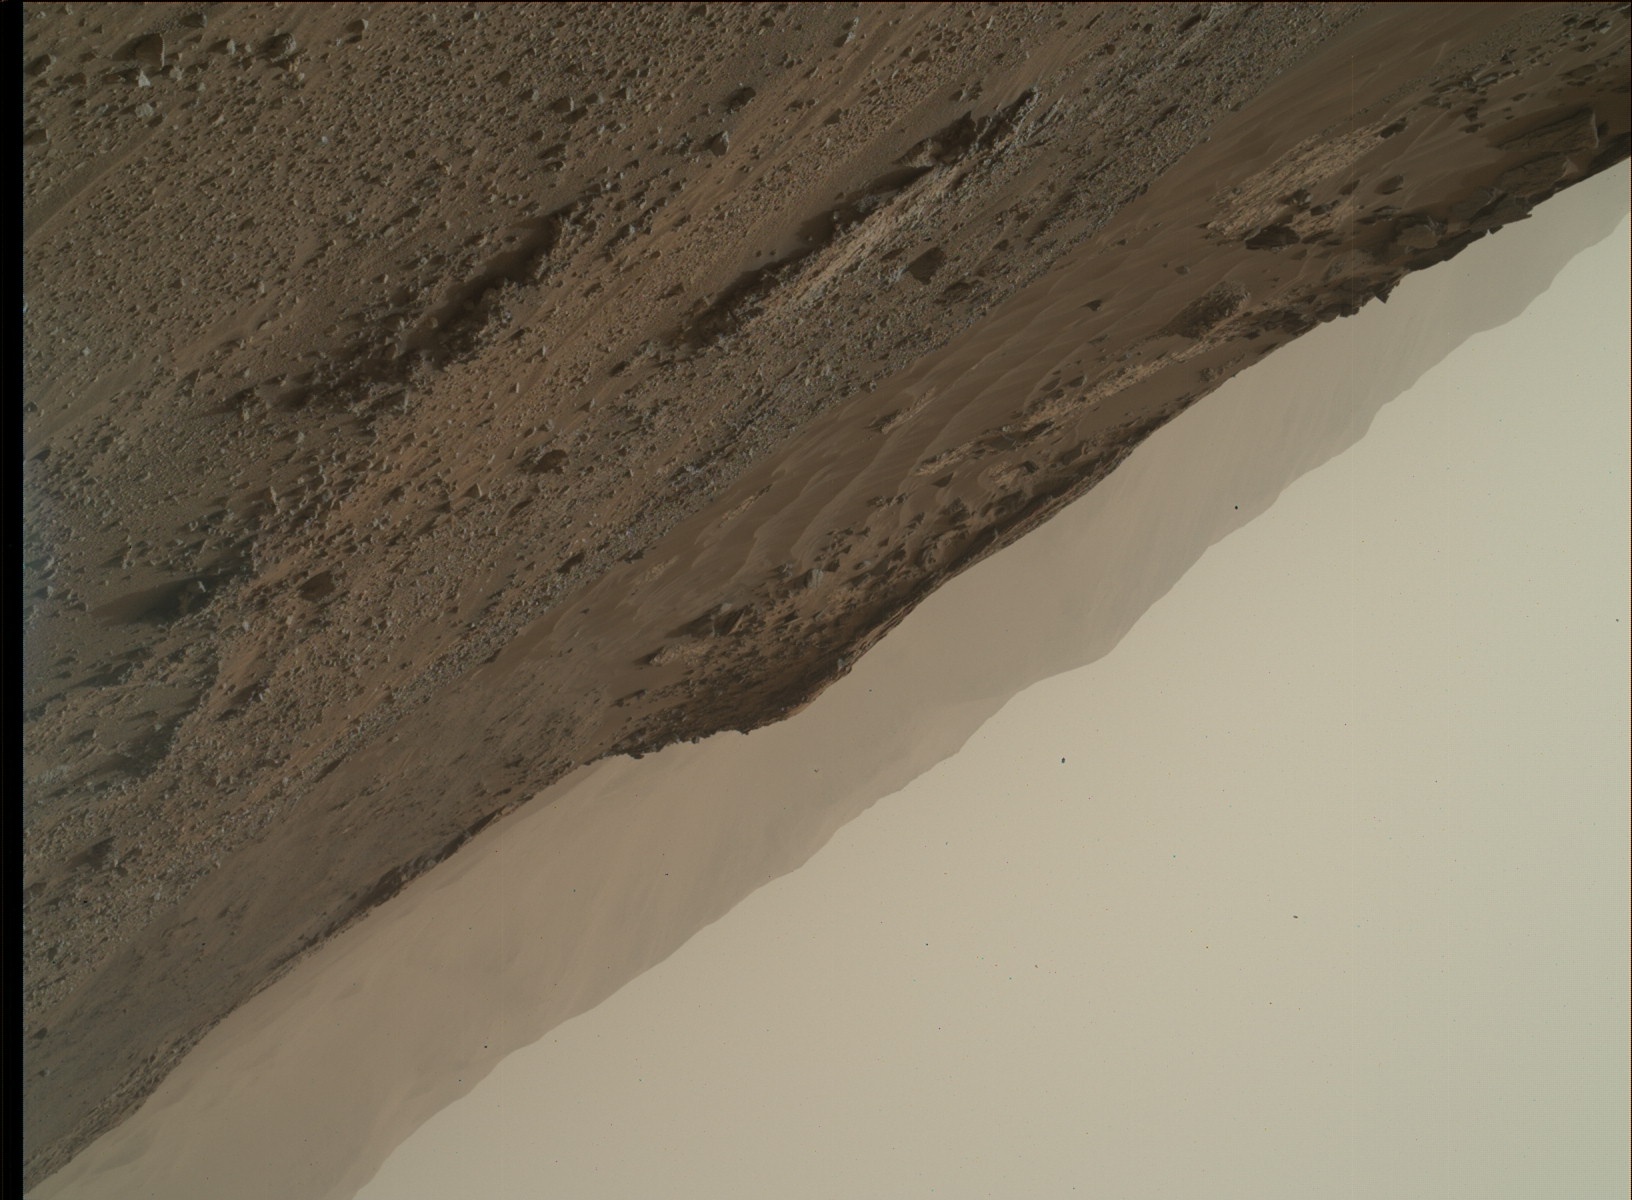 Nasa's Mars rover Curiosity acquired this image using its Mars Hand Lens Imager (MAHLI) on Sol 862